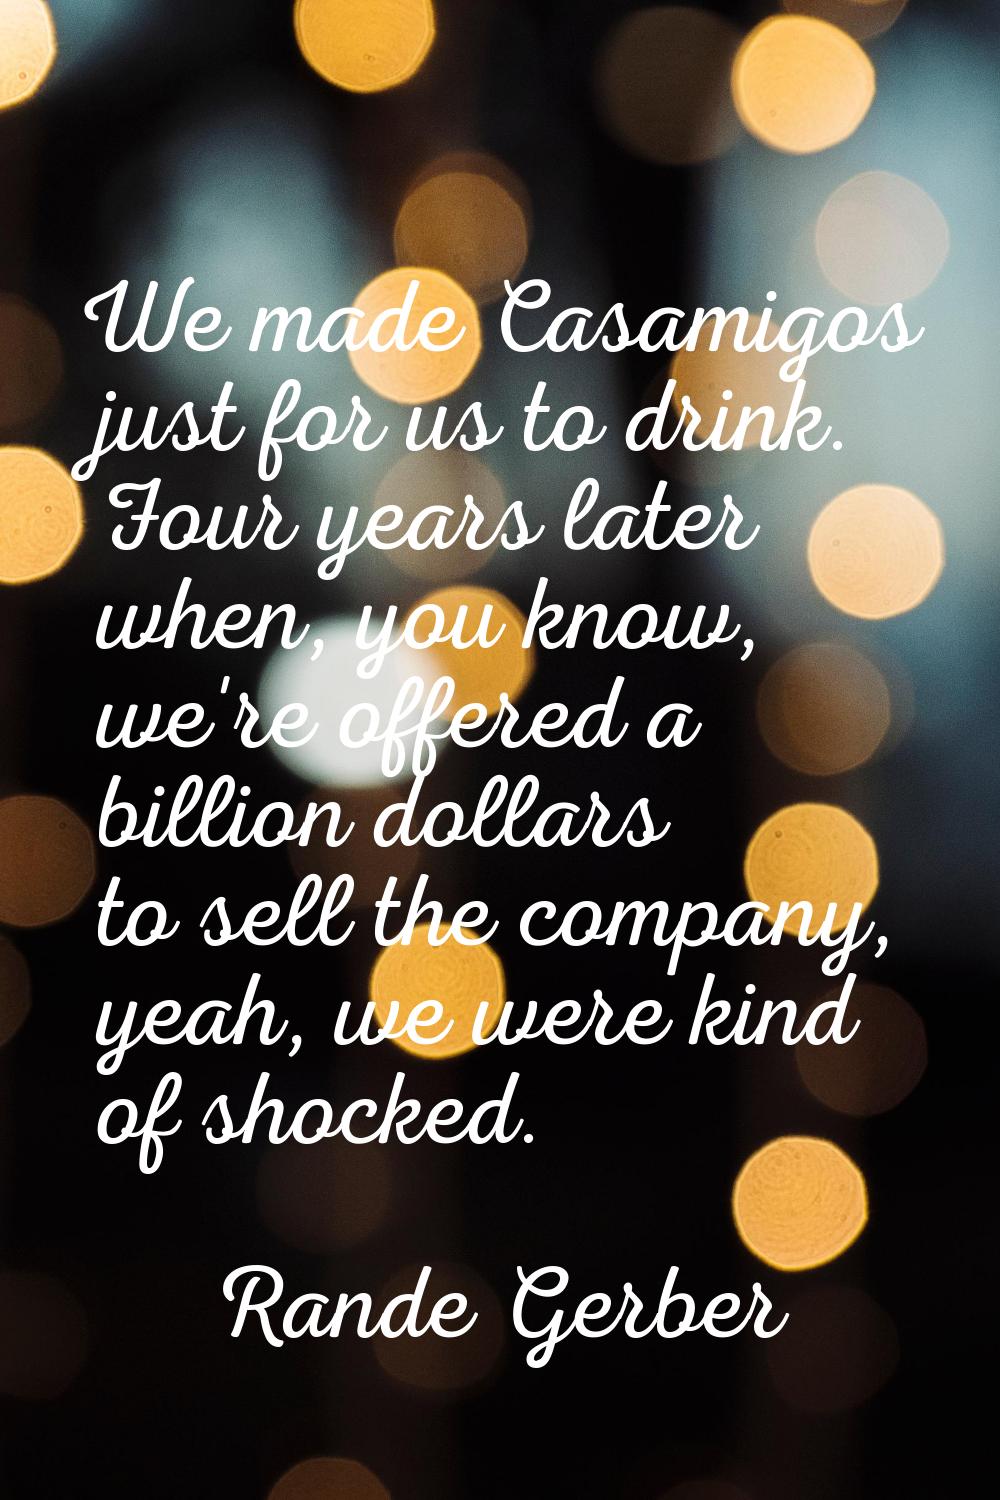 We made Casamigos just for us to drink. Four years later when, you know, we're offered a billion do